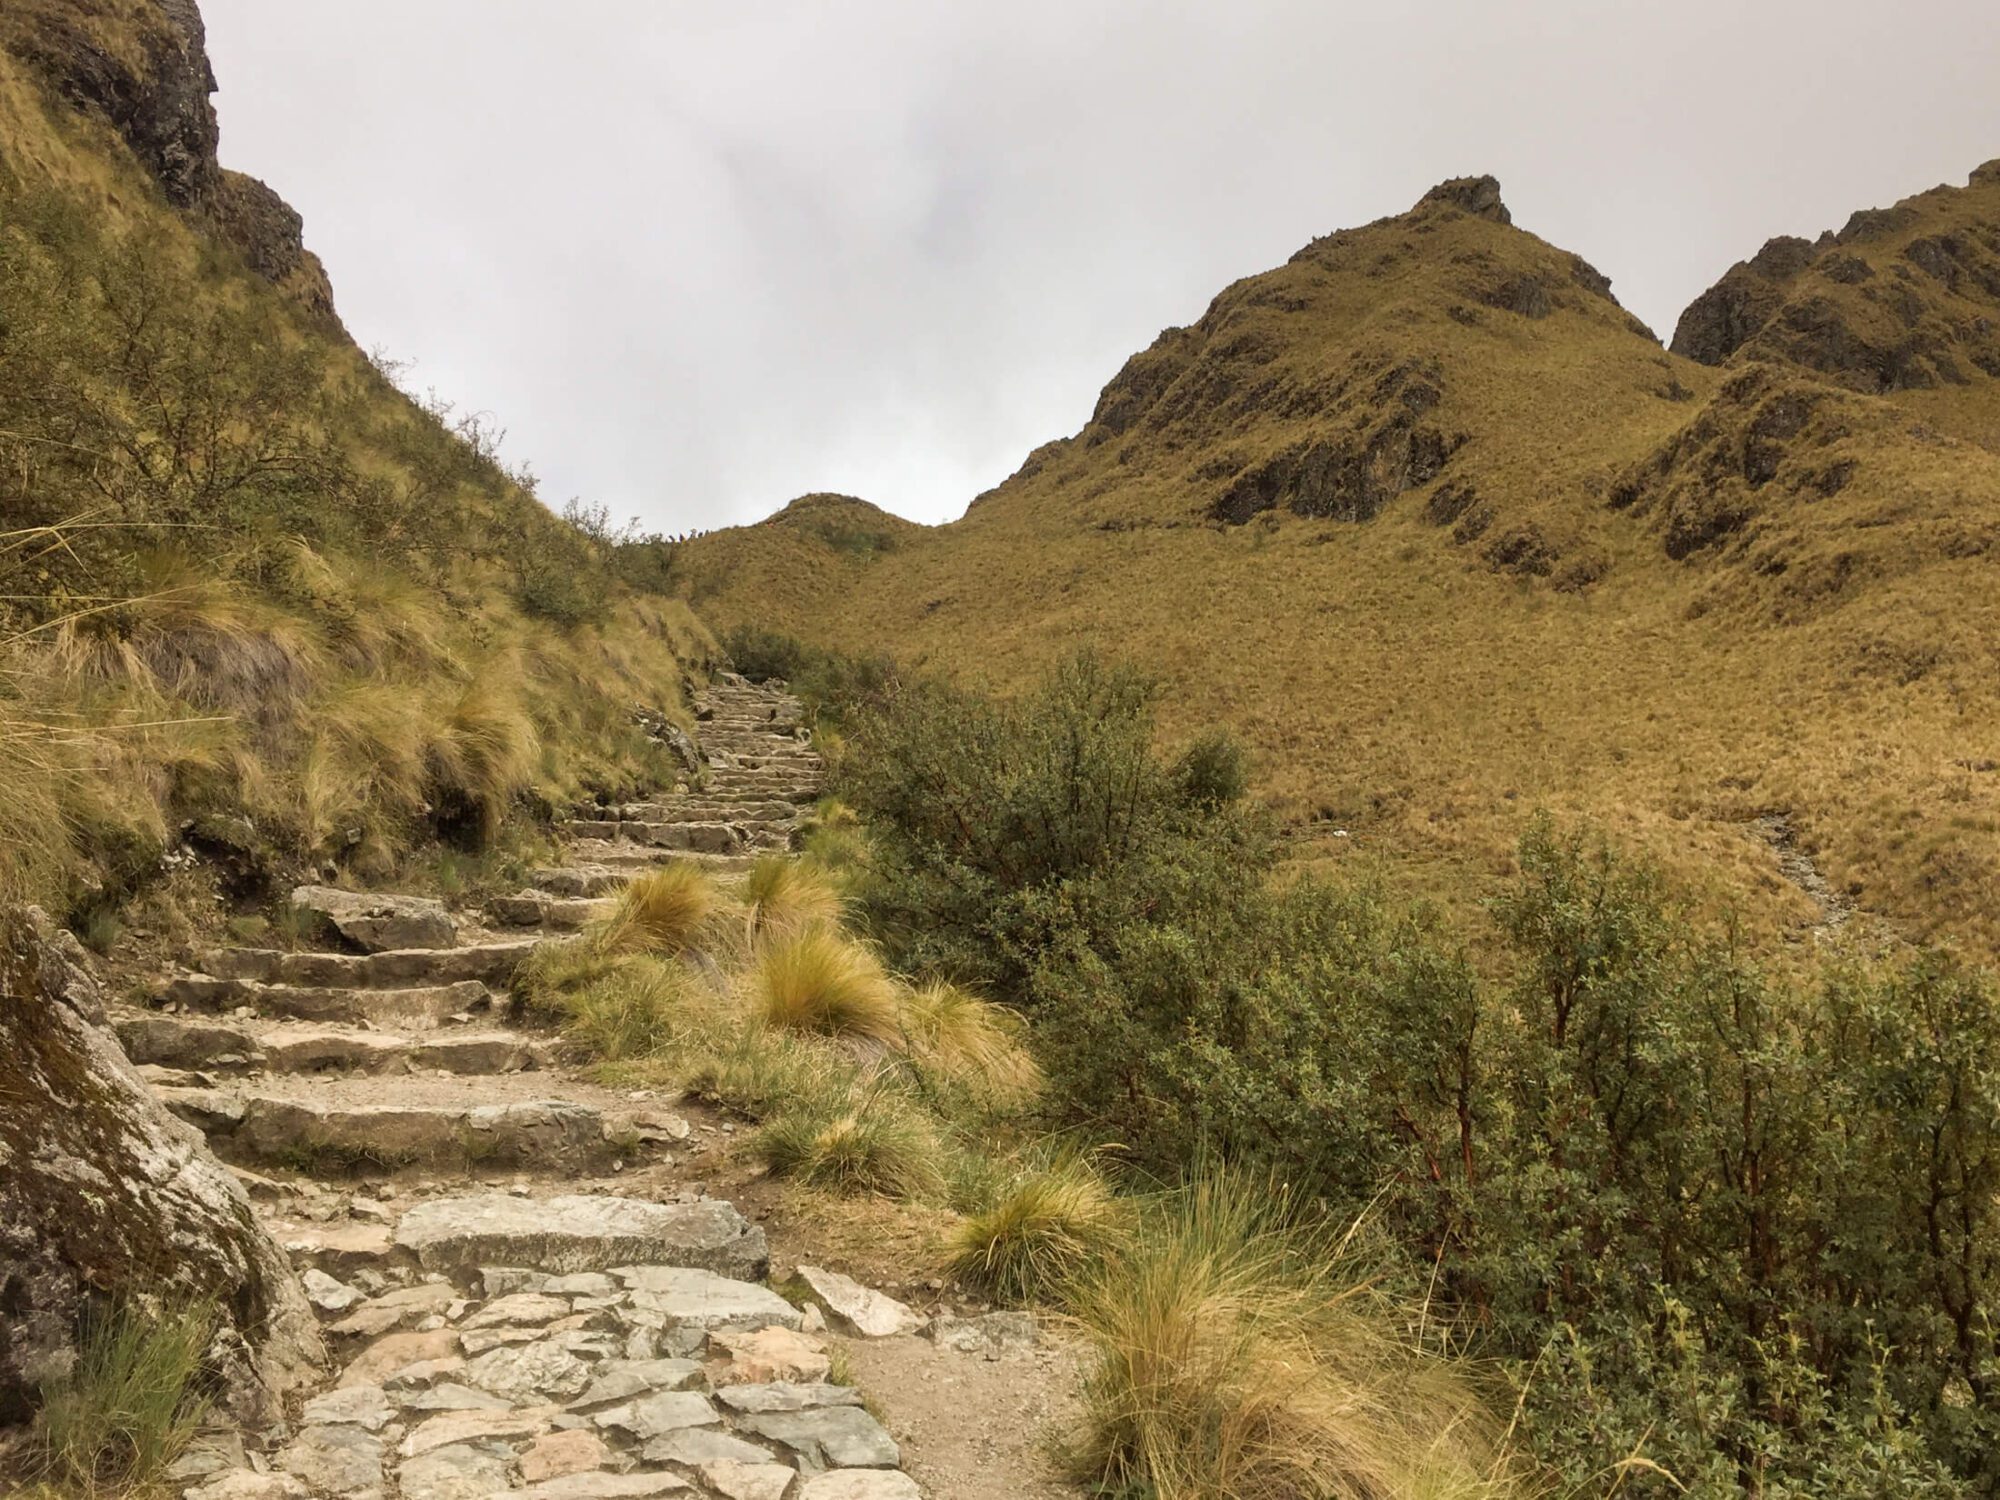 Approaching dead woman's pass on the inka trail